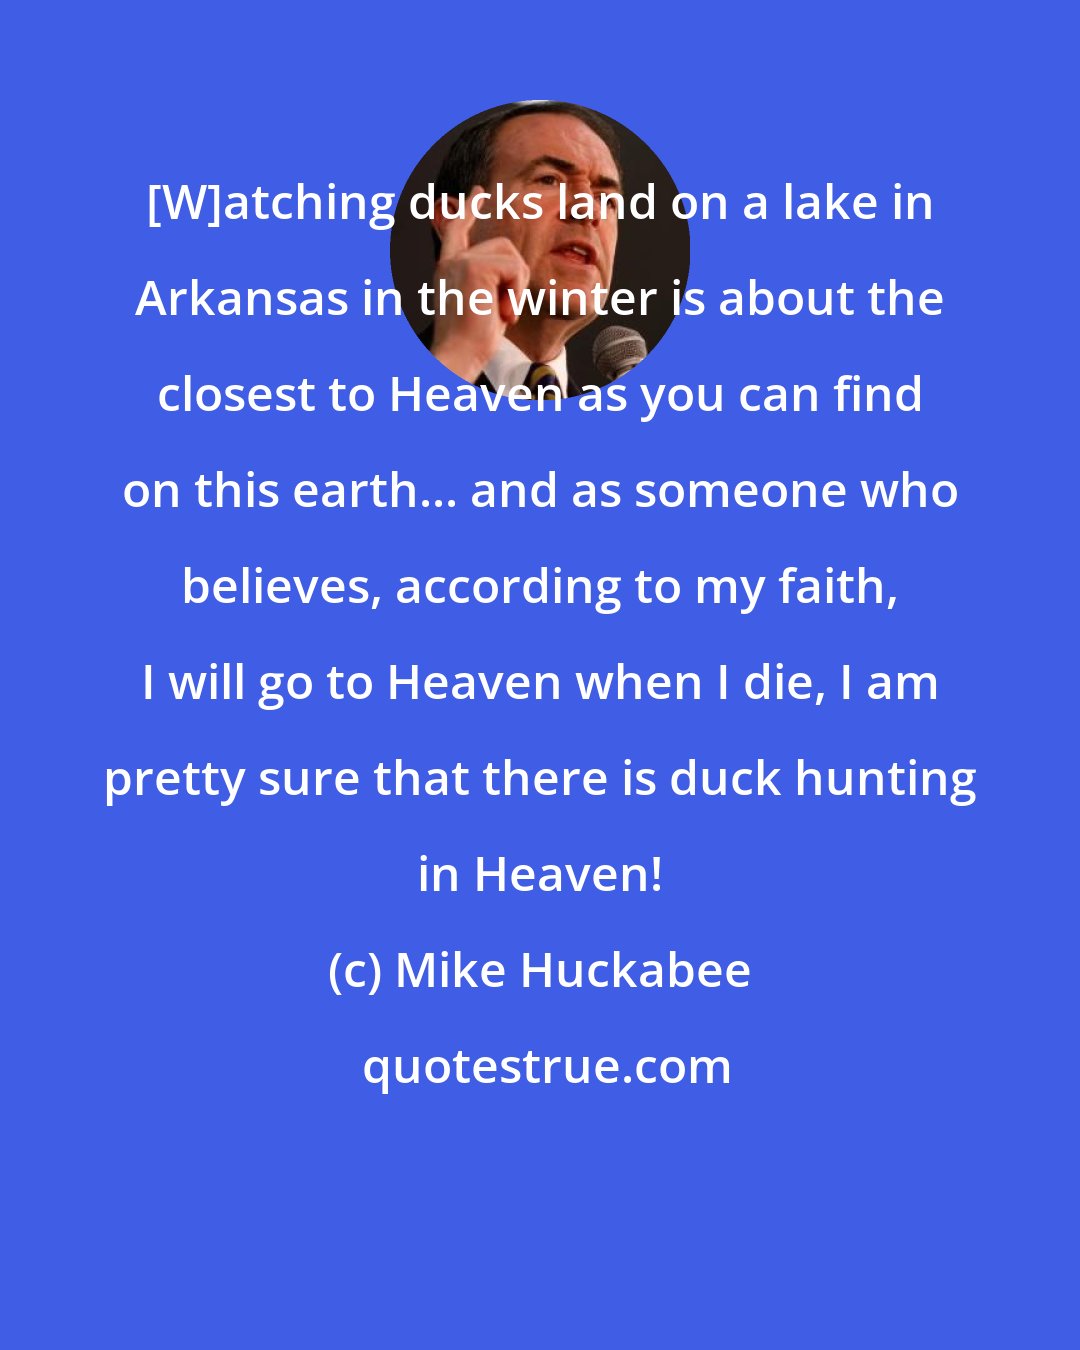 Mike Huckabee: [W]atching ducks land on a lake in Arkansas in the winter is about the closest to Heaven as you can find on this earth... and as someone who believes, according to my faith, I will go to Heaven when I die, I am pretty sure that there is duck hunting in Heaven!